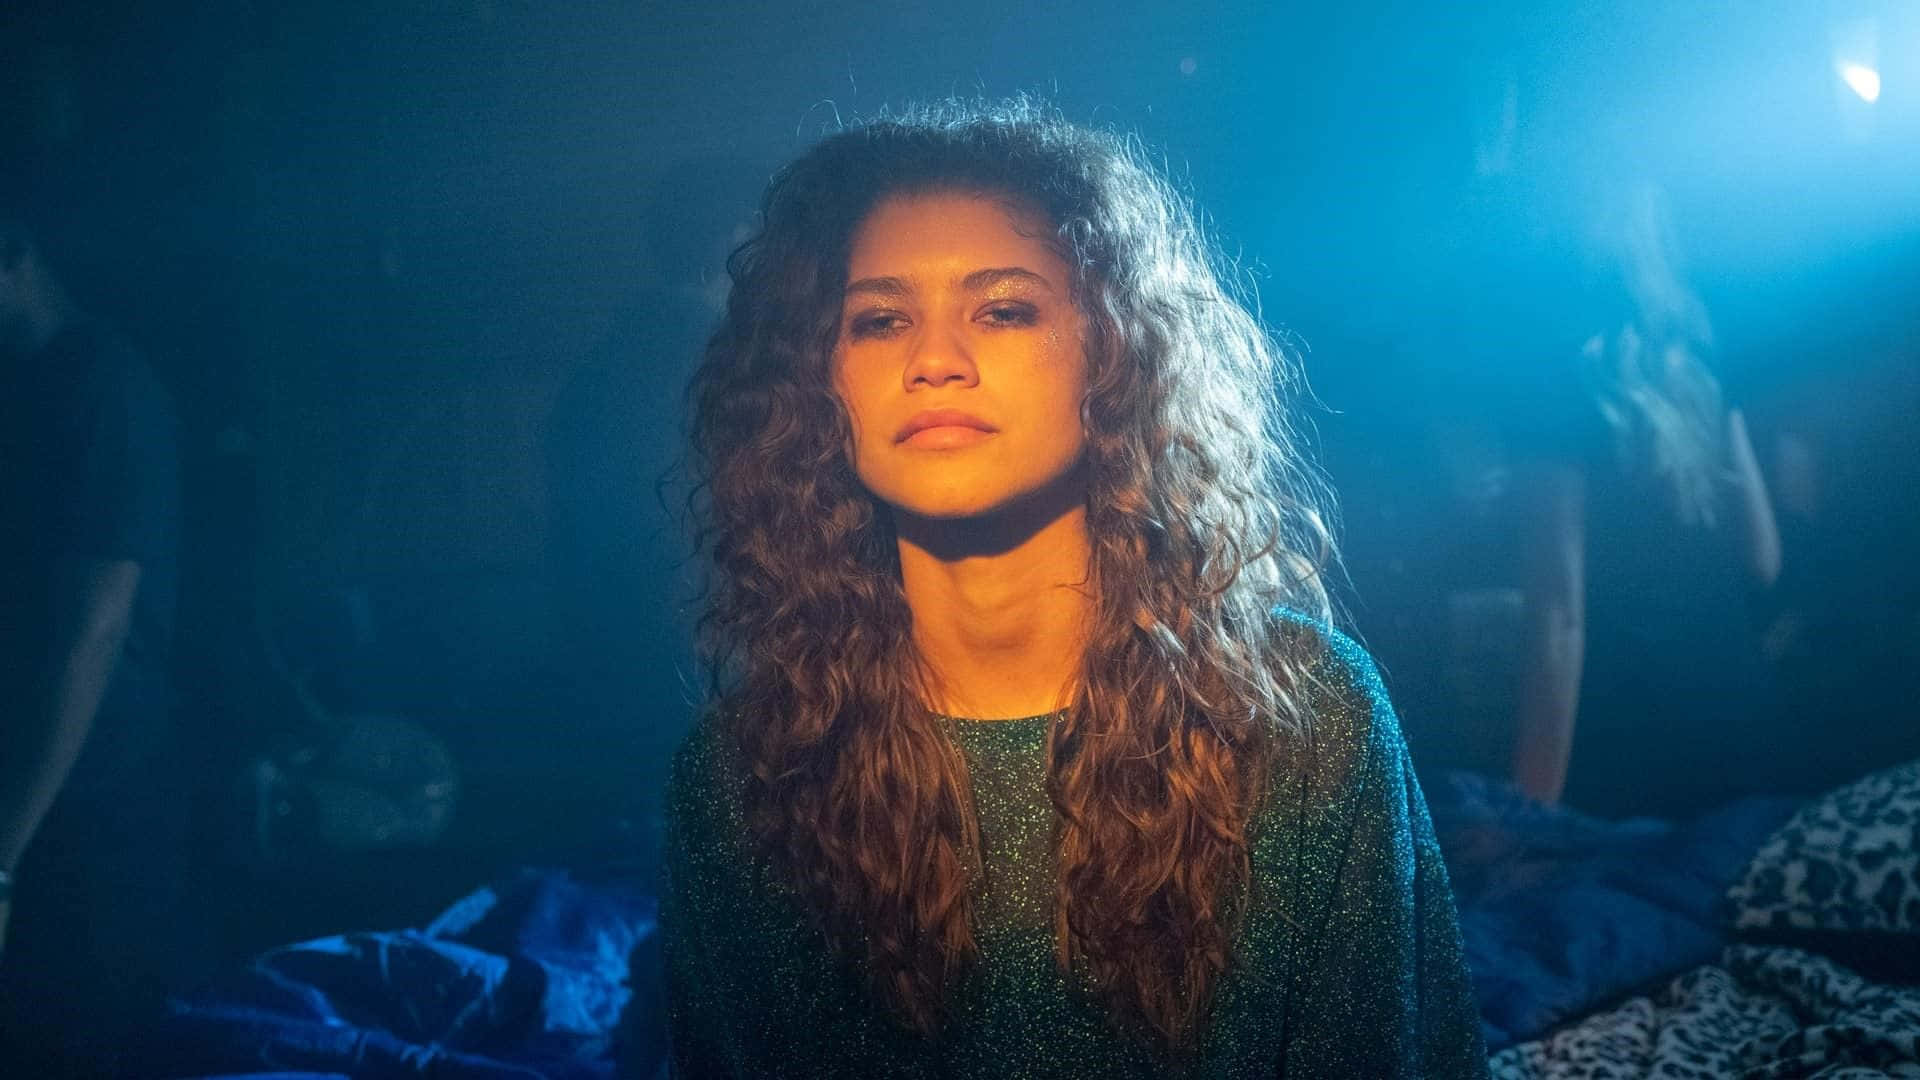 Download Euphoria Hbo Iphone With Rue In A Room Wallpaper | Wallpapers.com